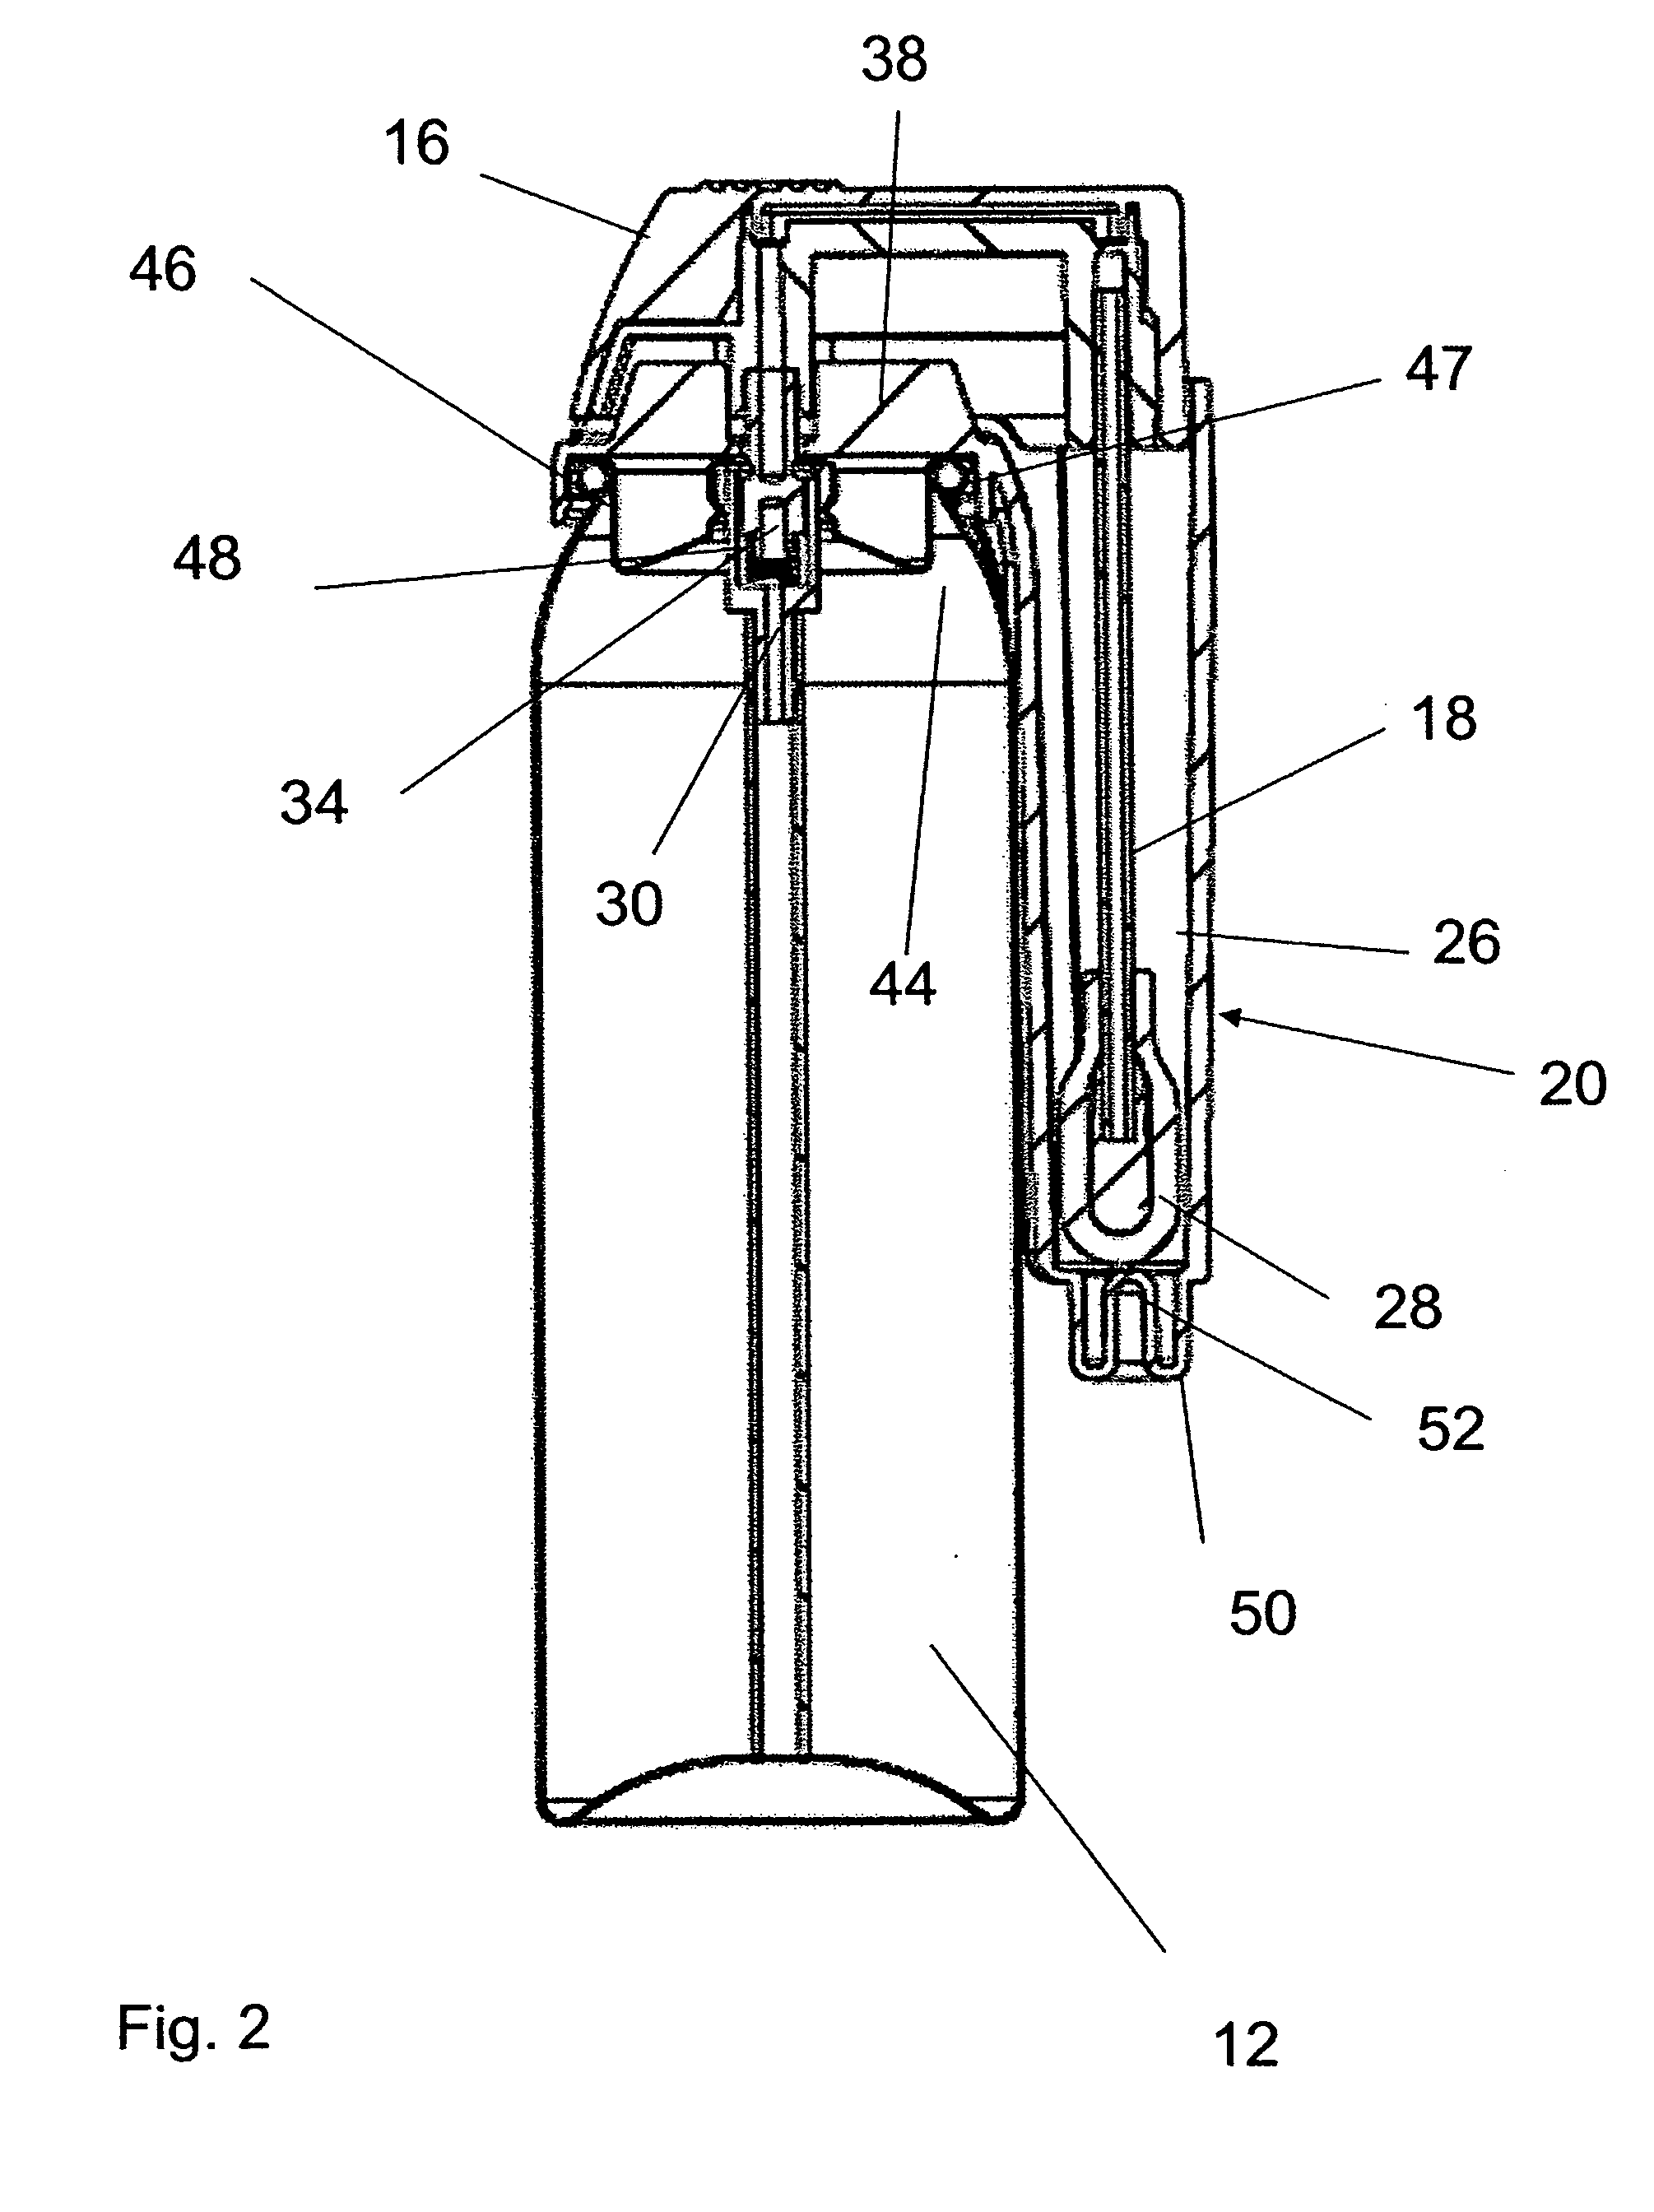 Cryosurgical device and method for cooling surfaces